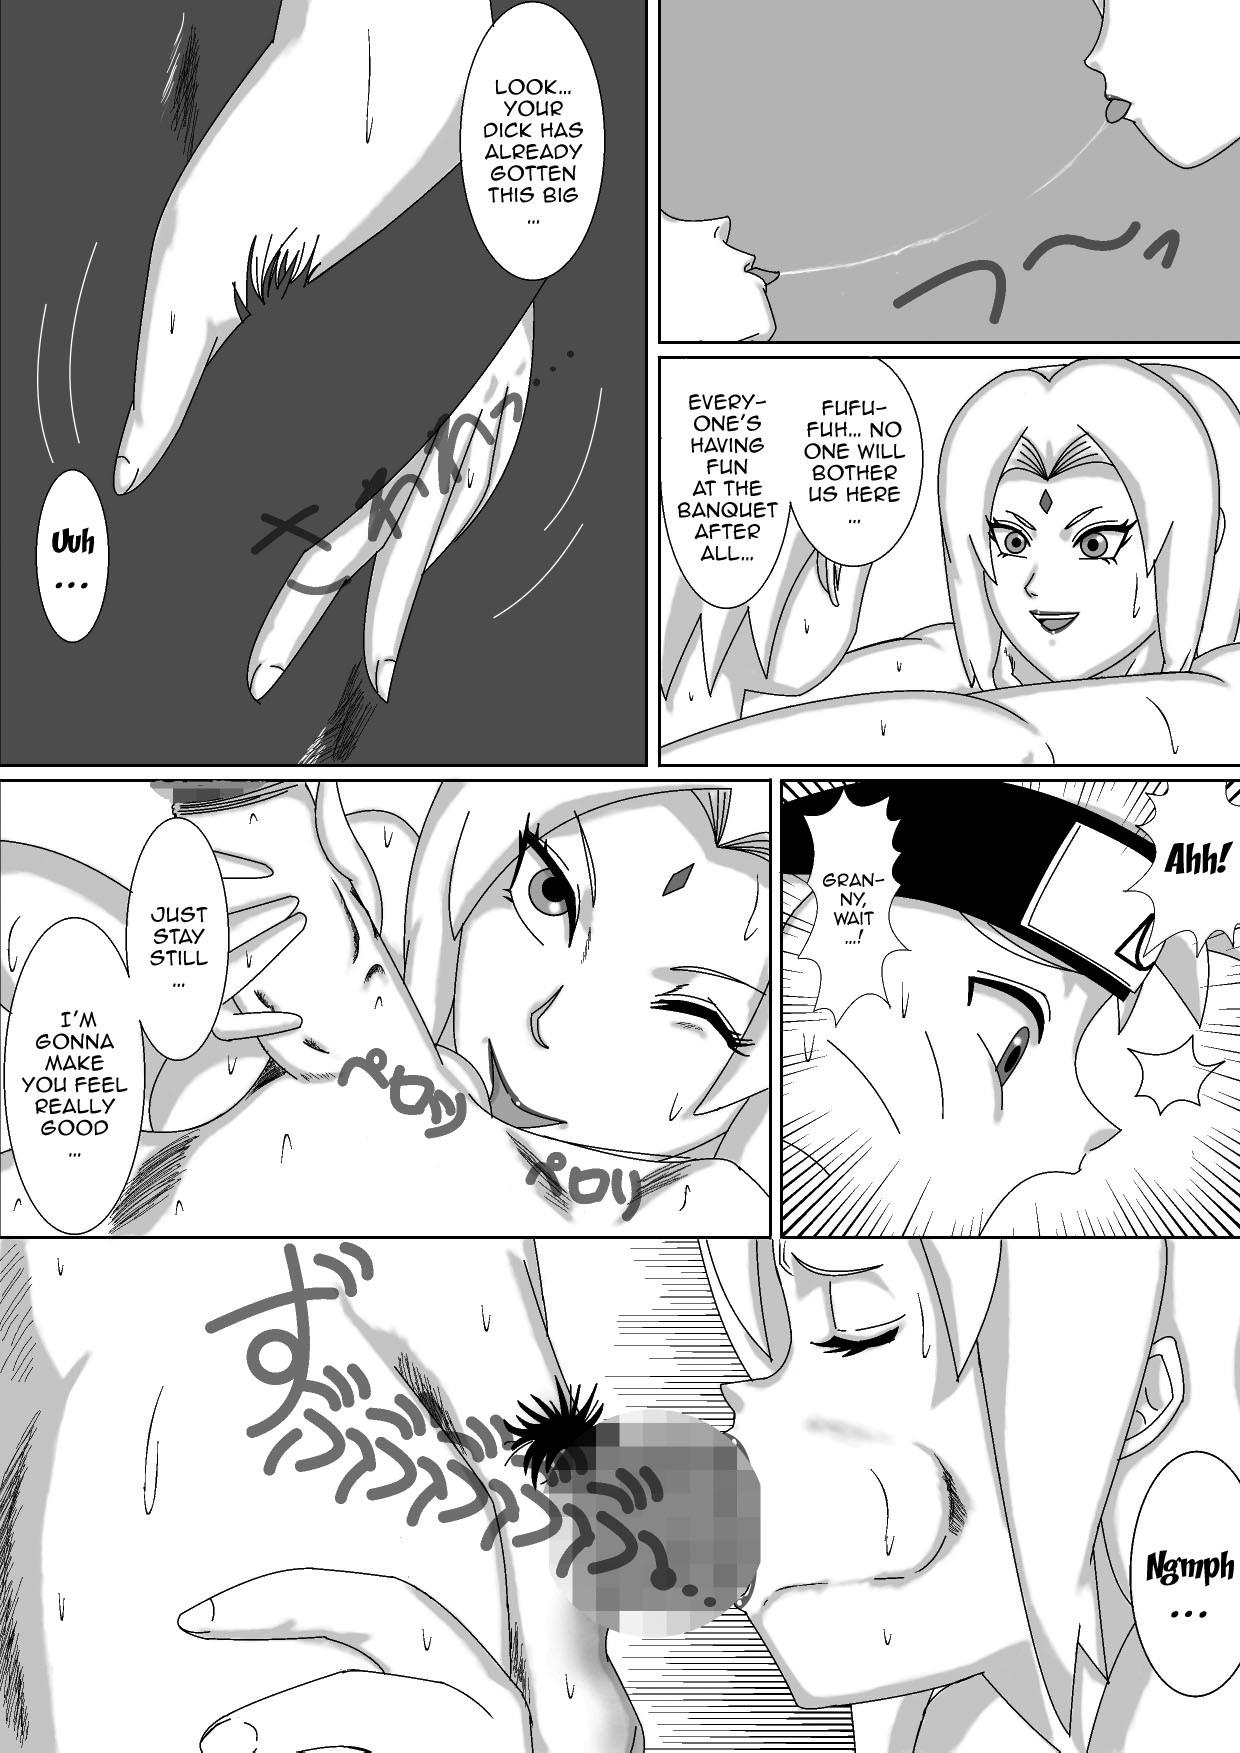 Eat Nomisugite Deisui Shita BBA to Yarimakutta Ken!! | The Case Of Having Sex With This Old Lady After She Got Herself Really Drunk - Naruto Rubdown - Page 7